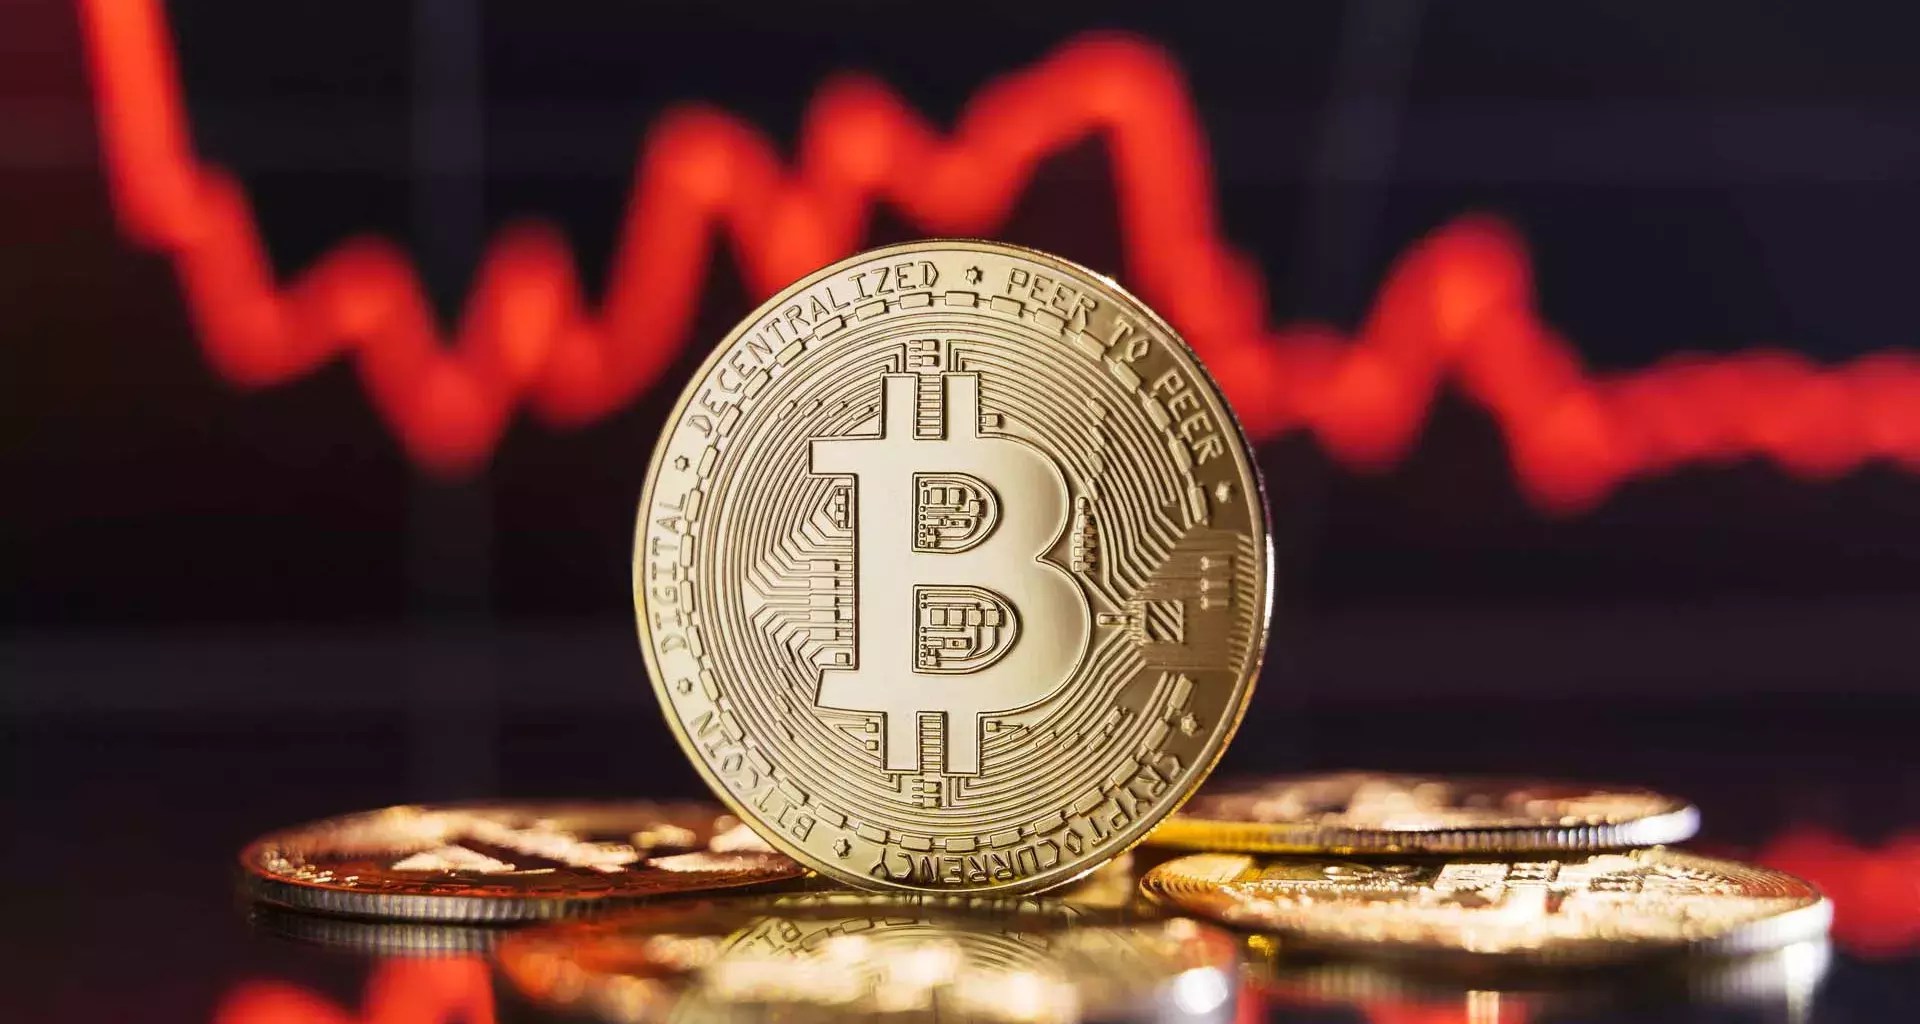 Bitcoin Price Falls Below Short-Term Holders’ Realized Price Of $66,200 – What Are The Implications?